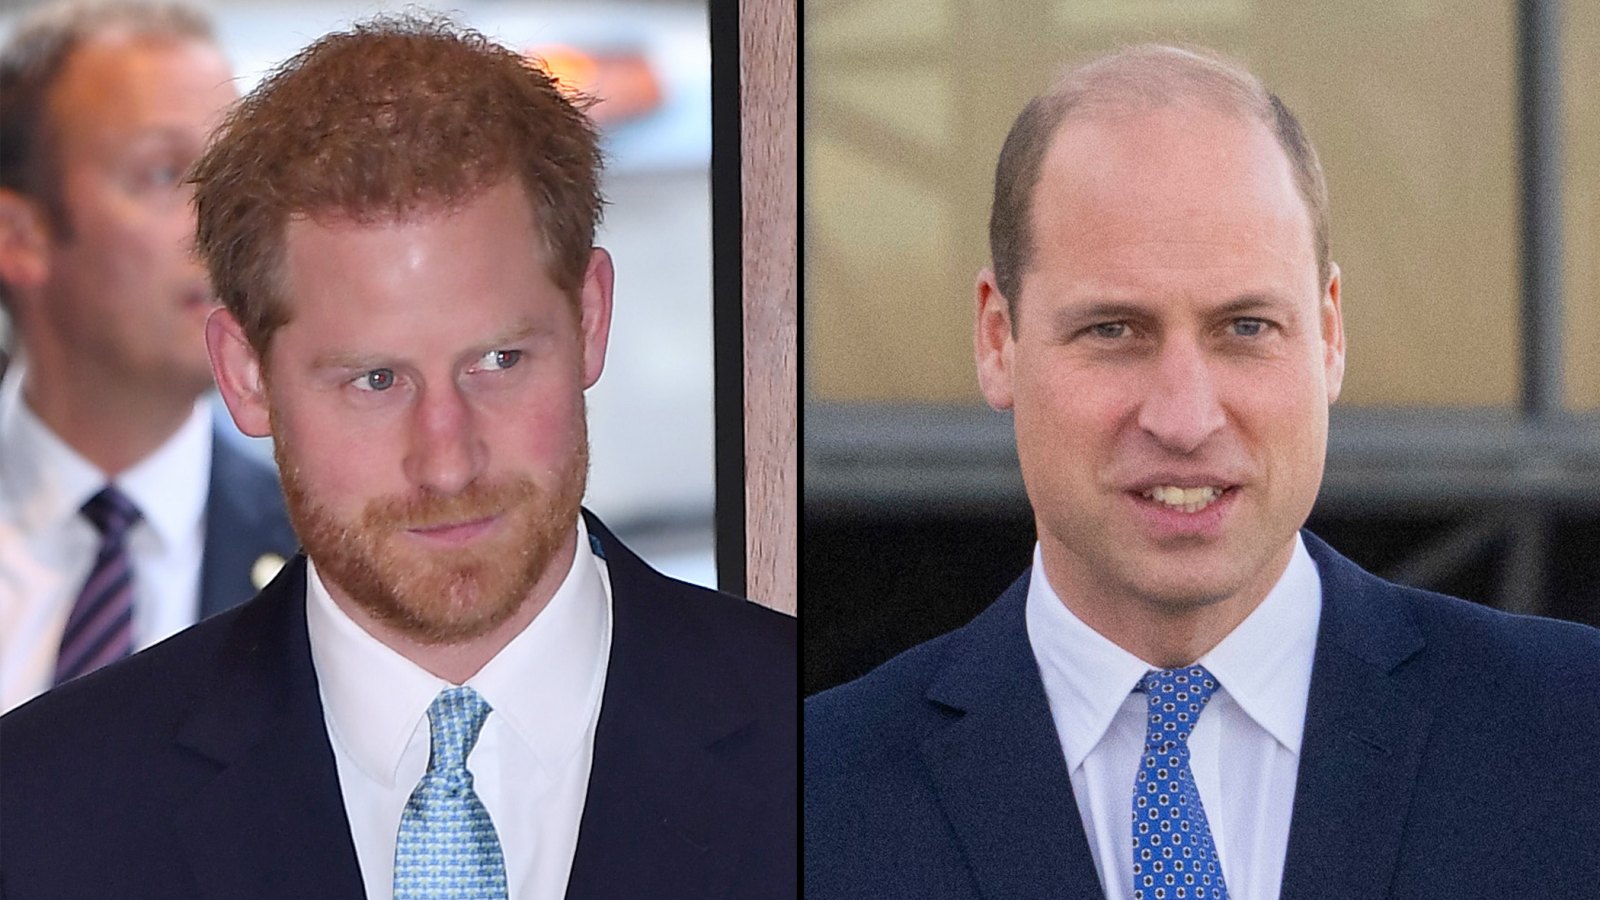 Prince Harry Defends Comment About Prince William’s Balding: ‘I Don’t See It as Cutting’